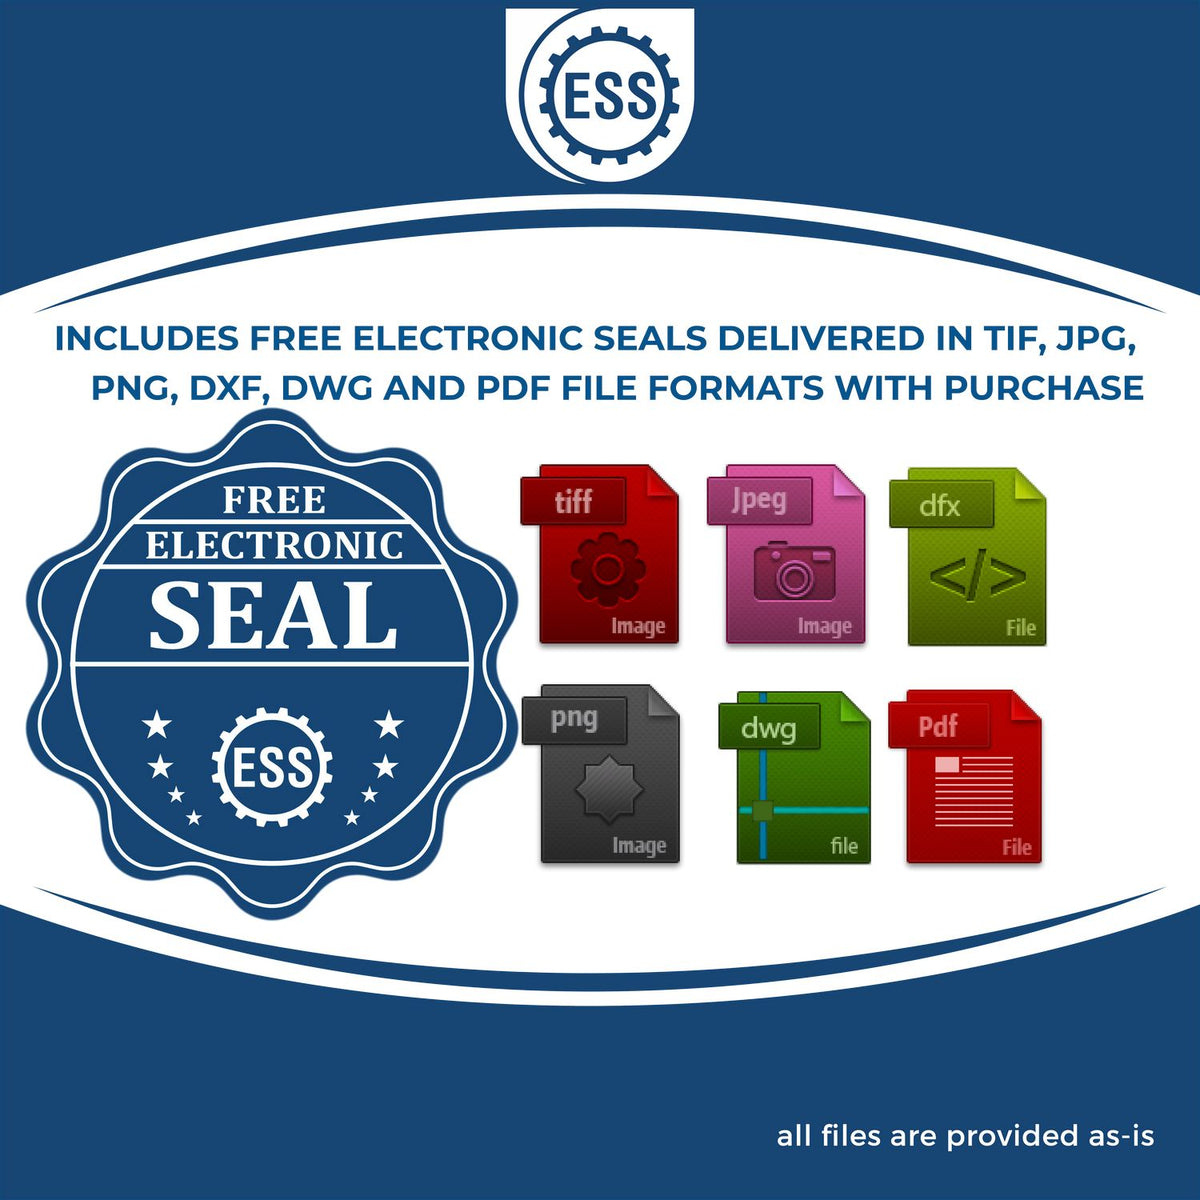 An infographic for the free electronic seal for the State of Illinois Long Reach Architectural Embossing Seal illustrating the different file type icons such as DXF, DWG, TIF, JPG and PNG.